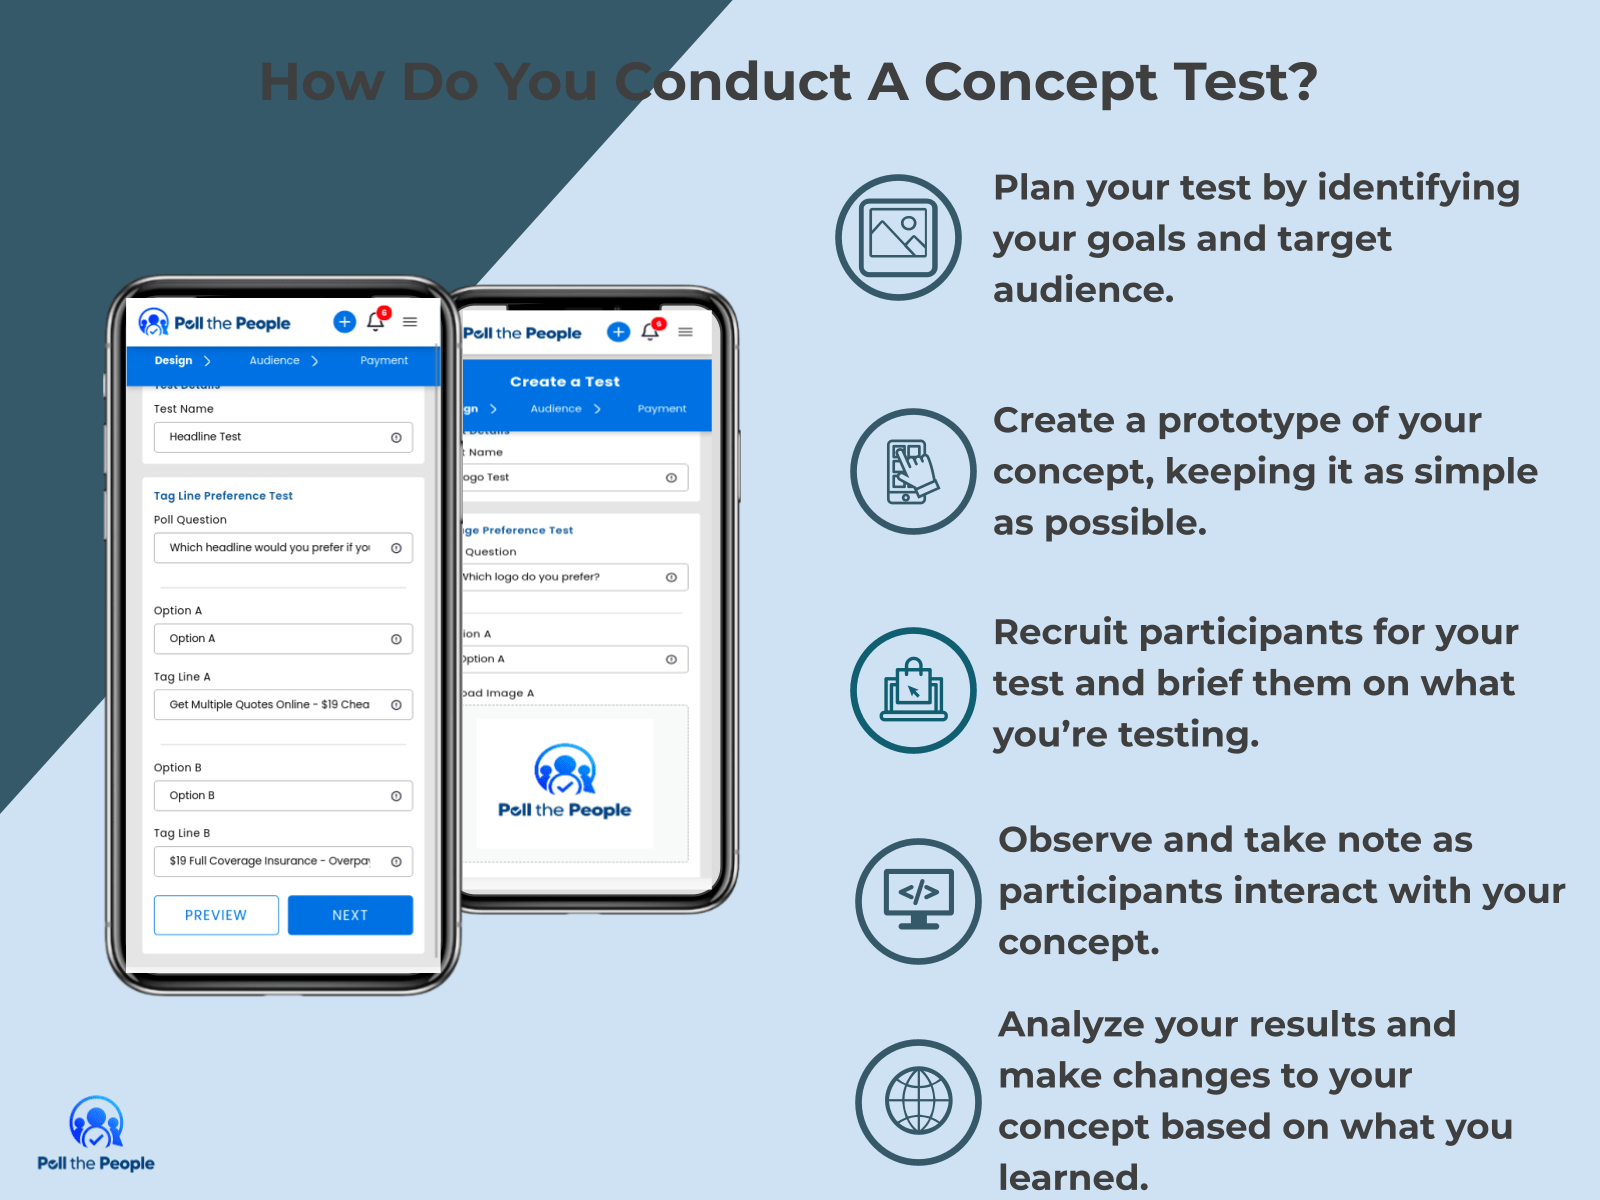 INFOGRAPHIC: How do you conduct a concept test? - Poll the People